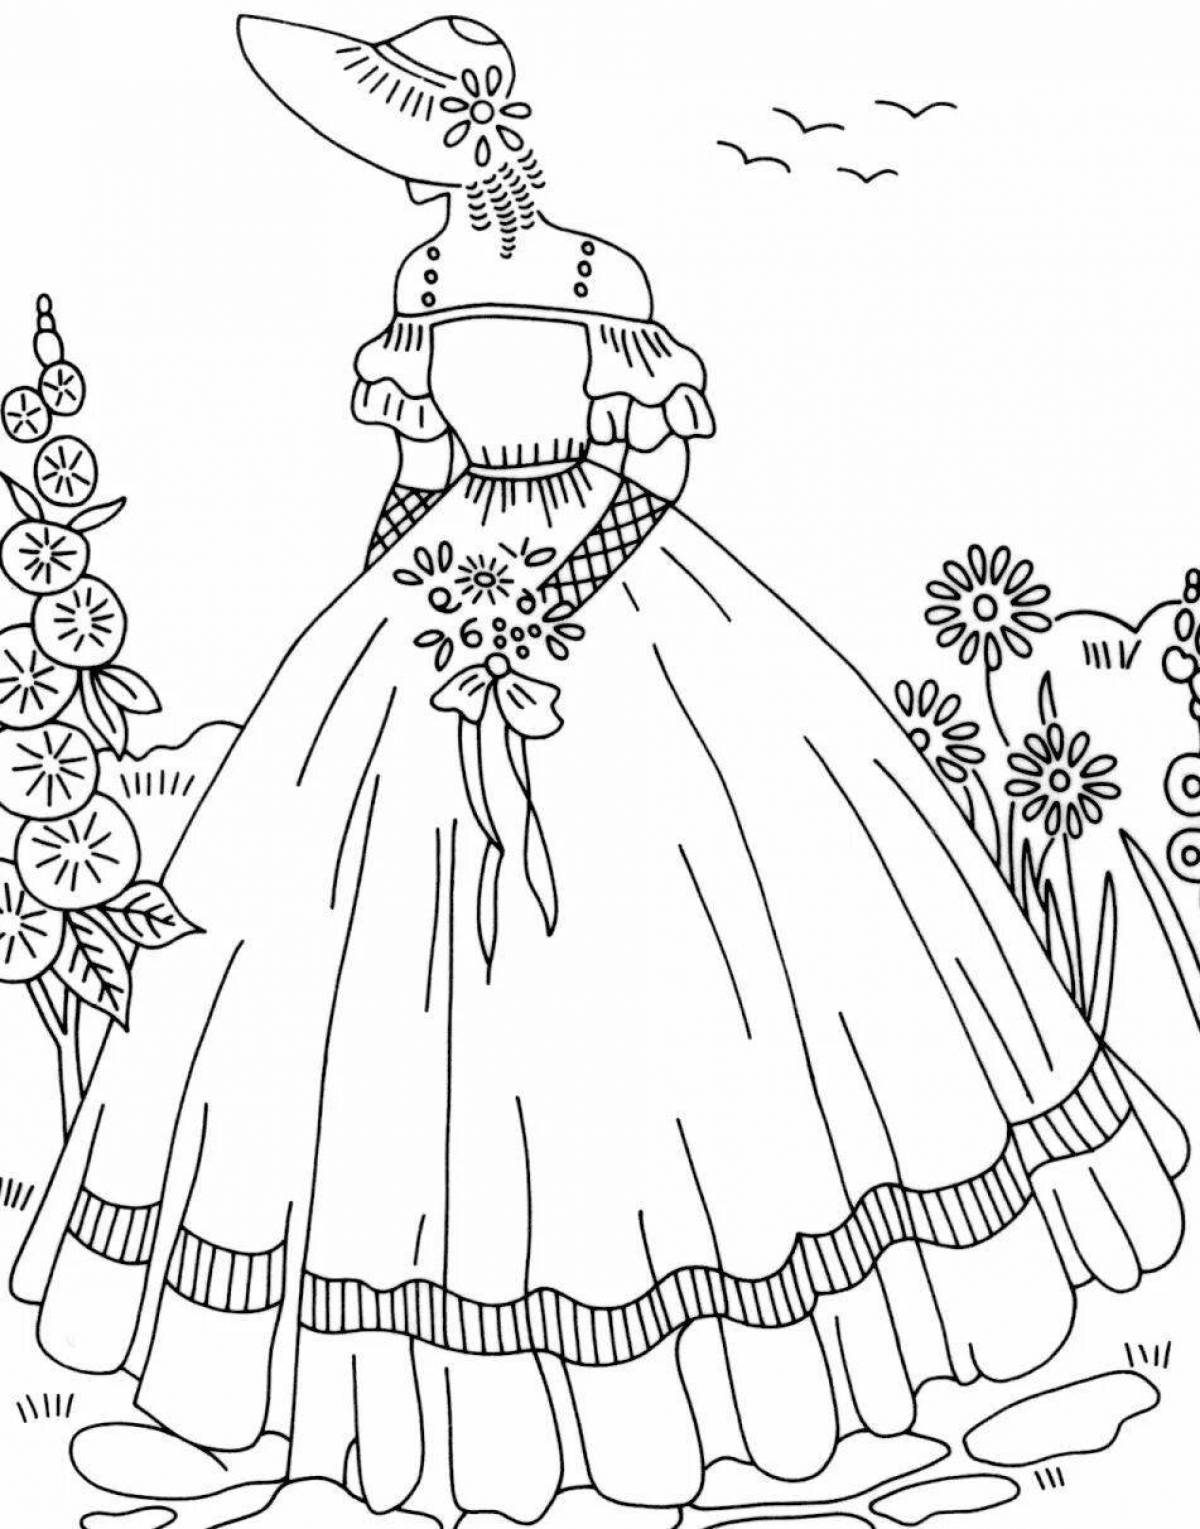 Coloring page shining puffy dress